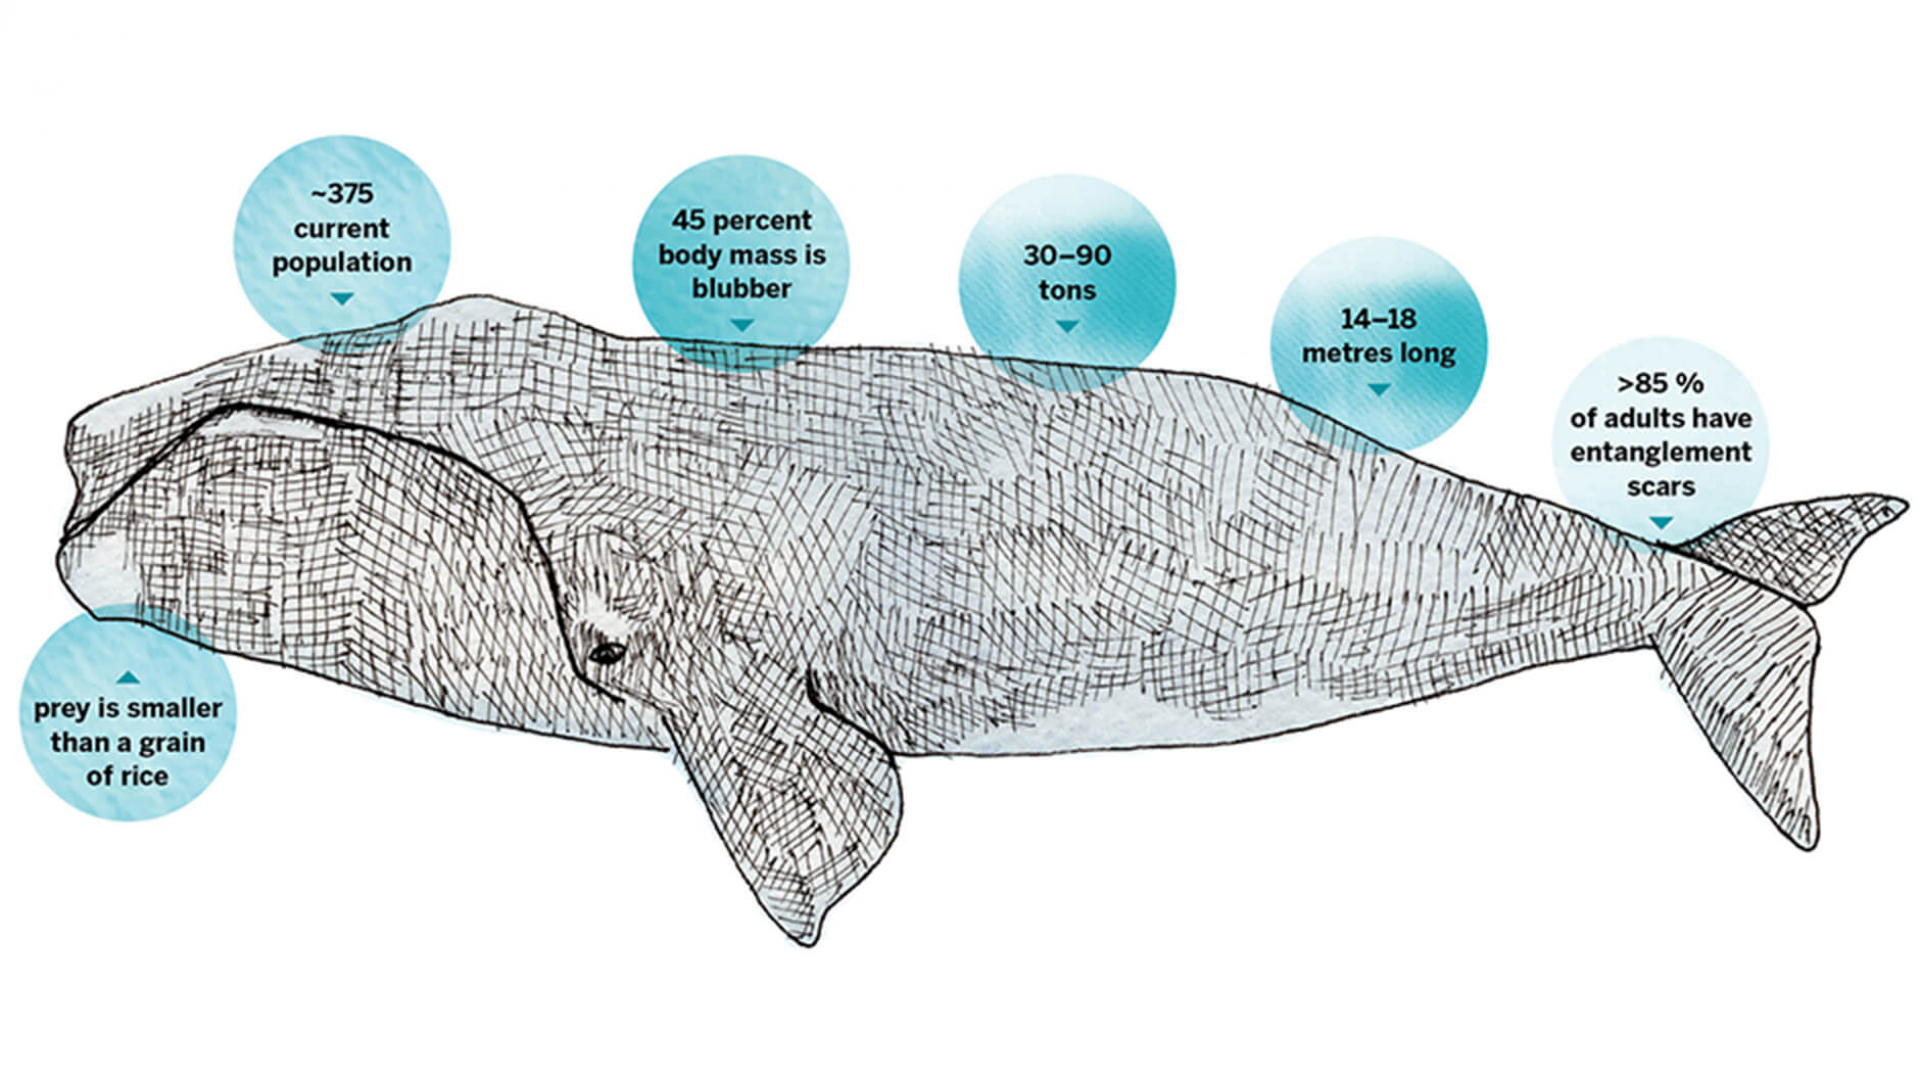 Illustration of a whale with fact bubbles surrounding it. The bubbles contain these facts: Prey is smaller than a grain of rice. ~375 current population. 45 percent body mass is blubber. 30-90 tons. 14-18 metres long. >85% of adults have entanglement scars.